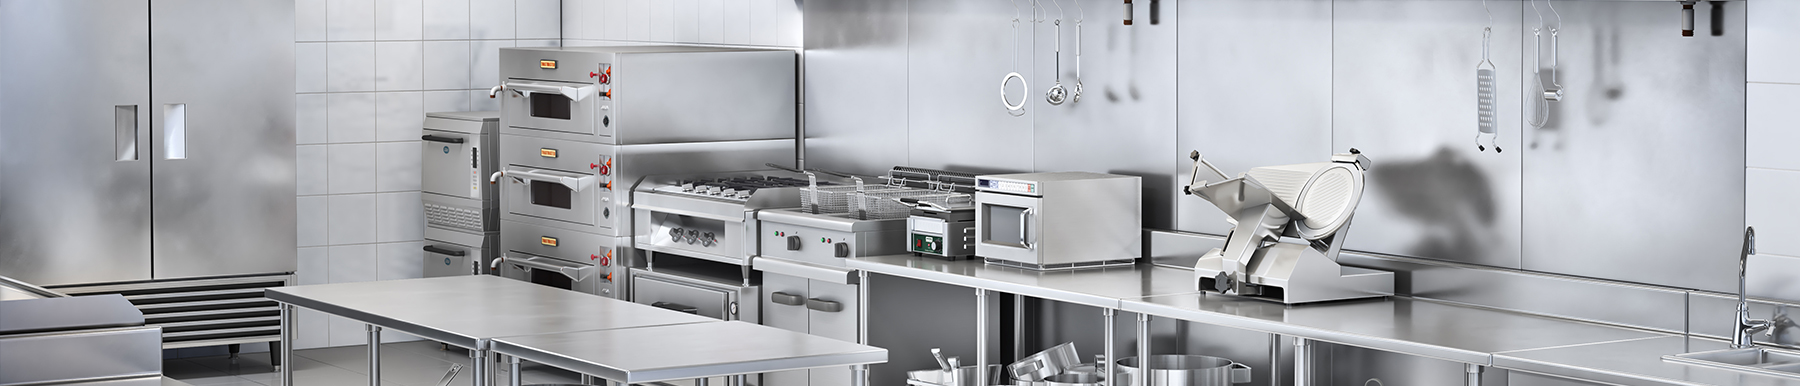 Catering Equipment Suppliers Near Wycombe | H2 Catering Equipment Catering Equipment